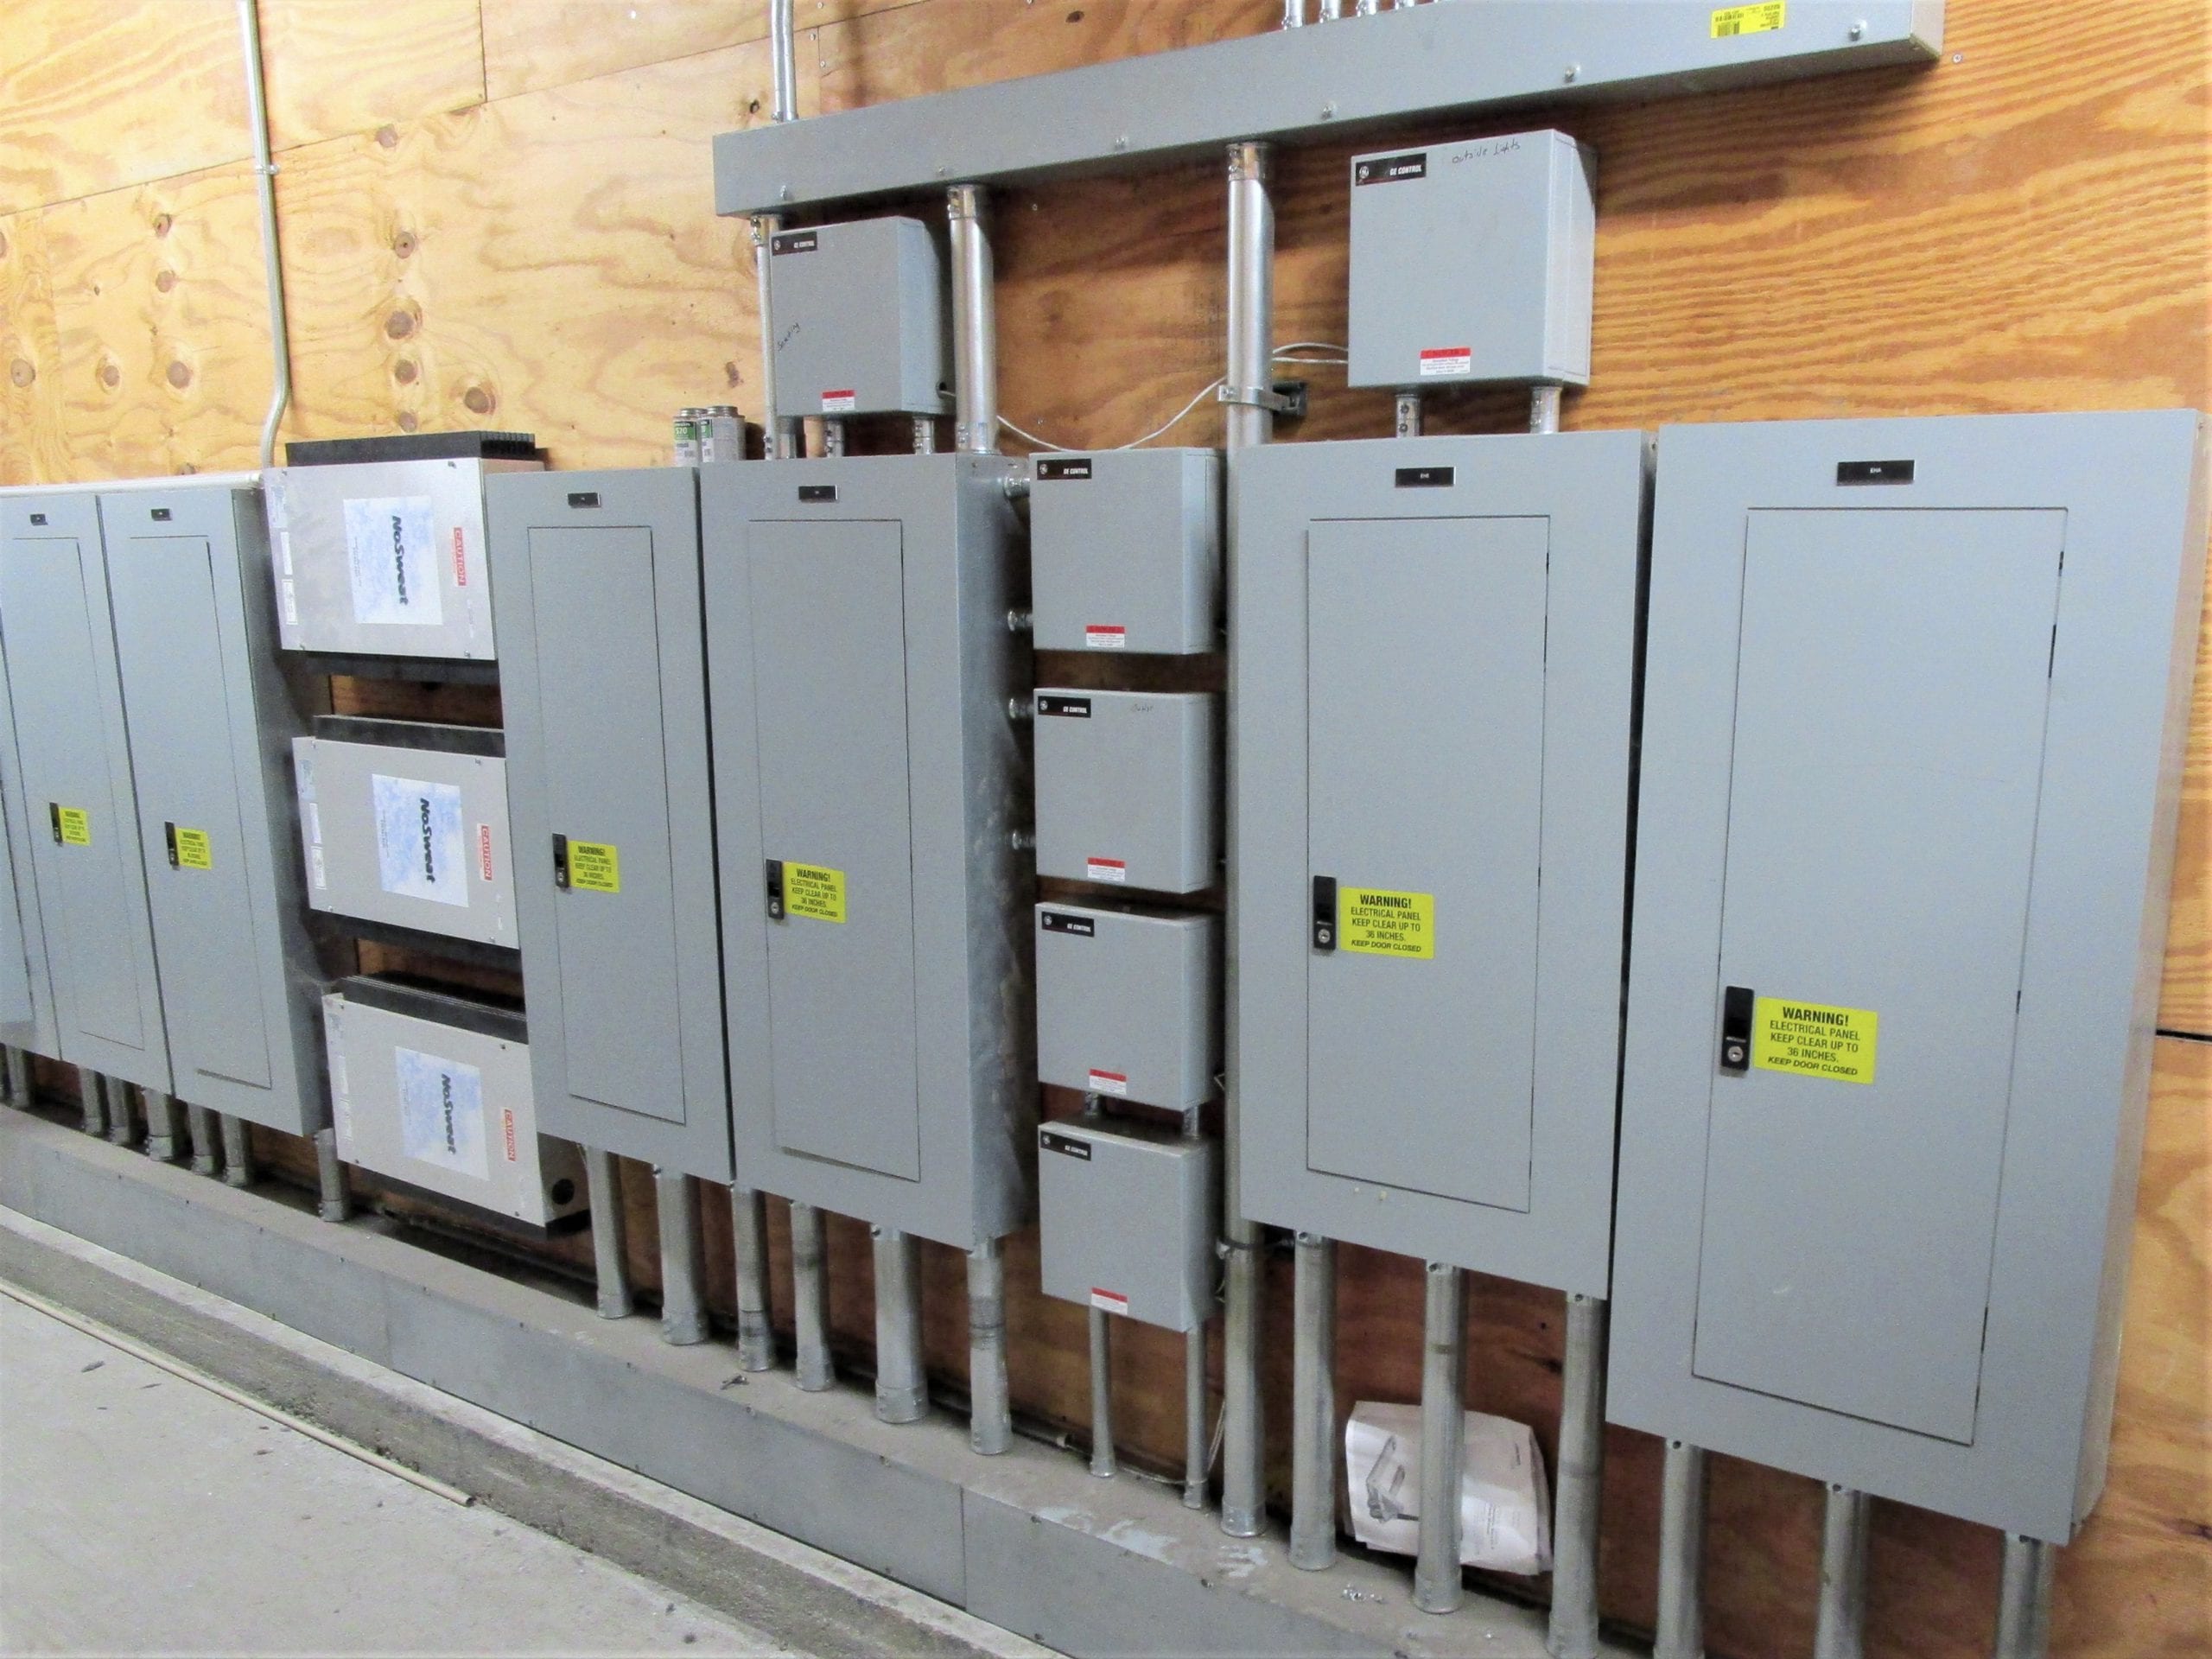 Electricity panels from a building project